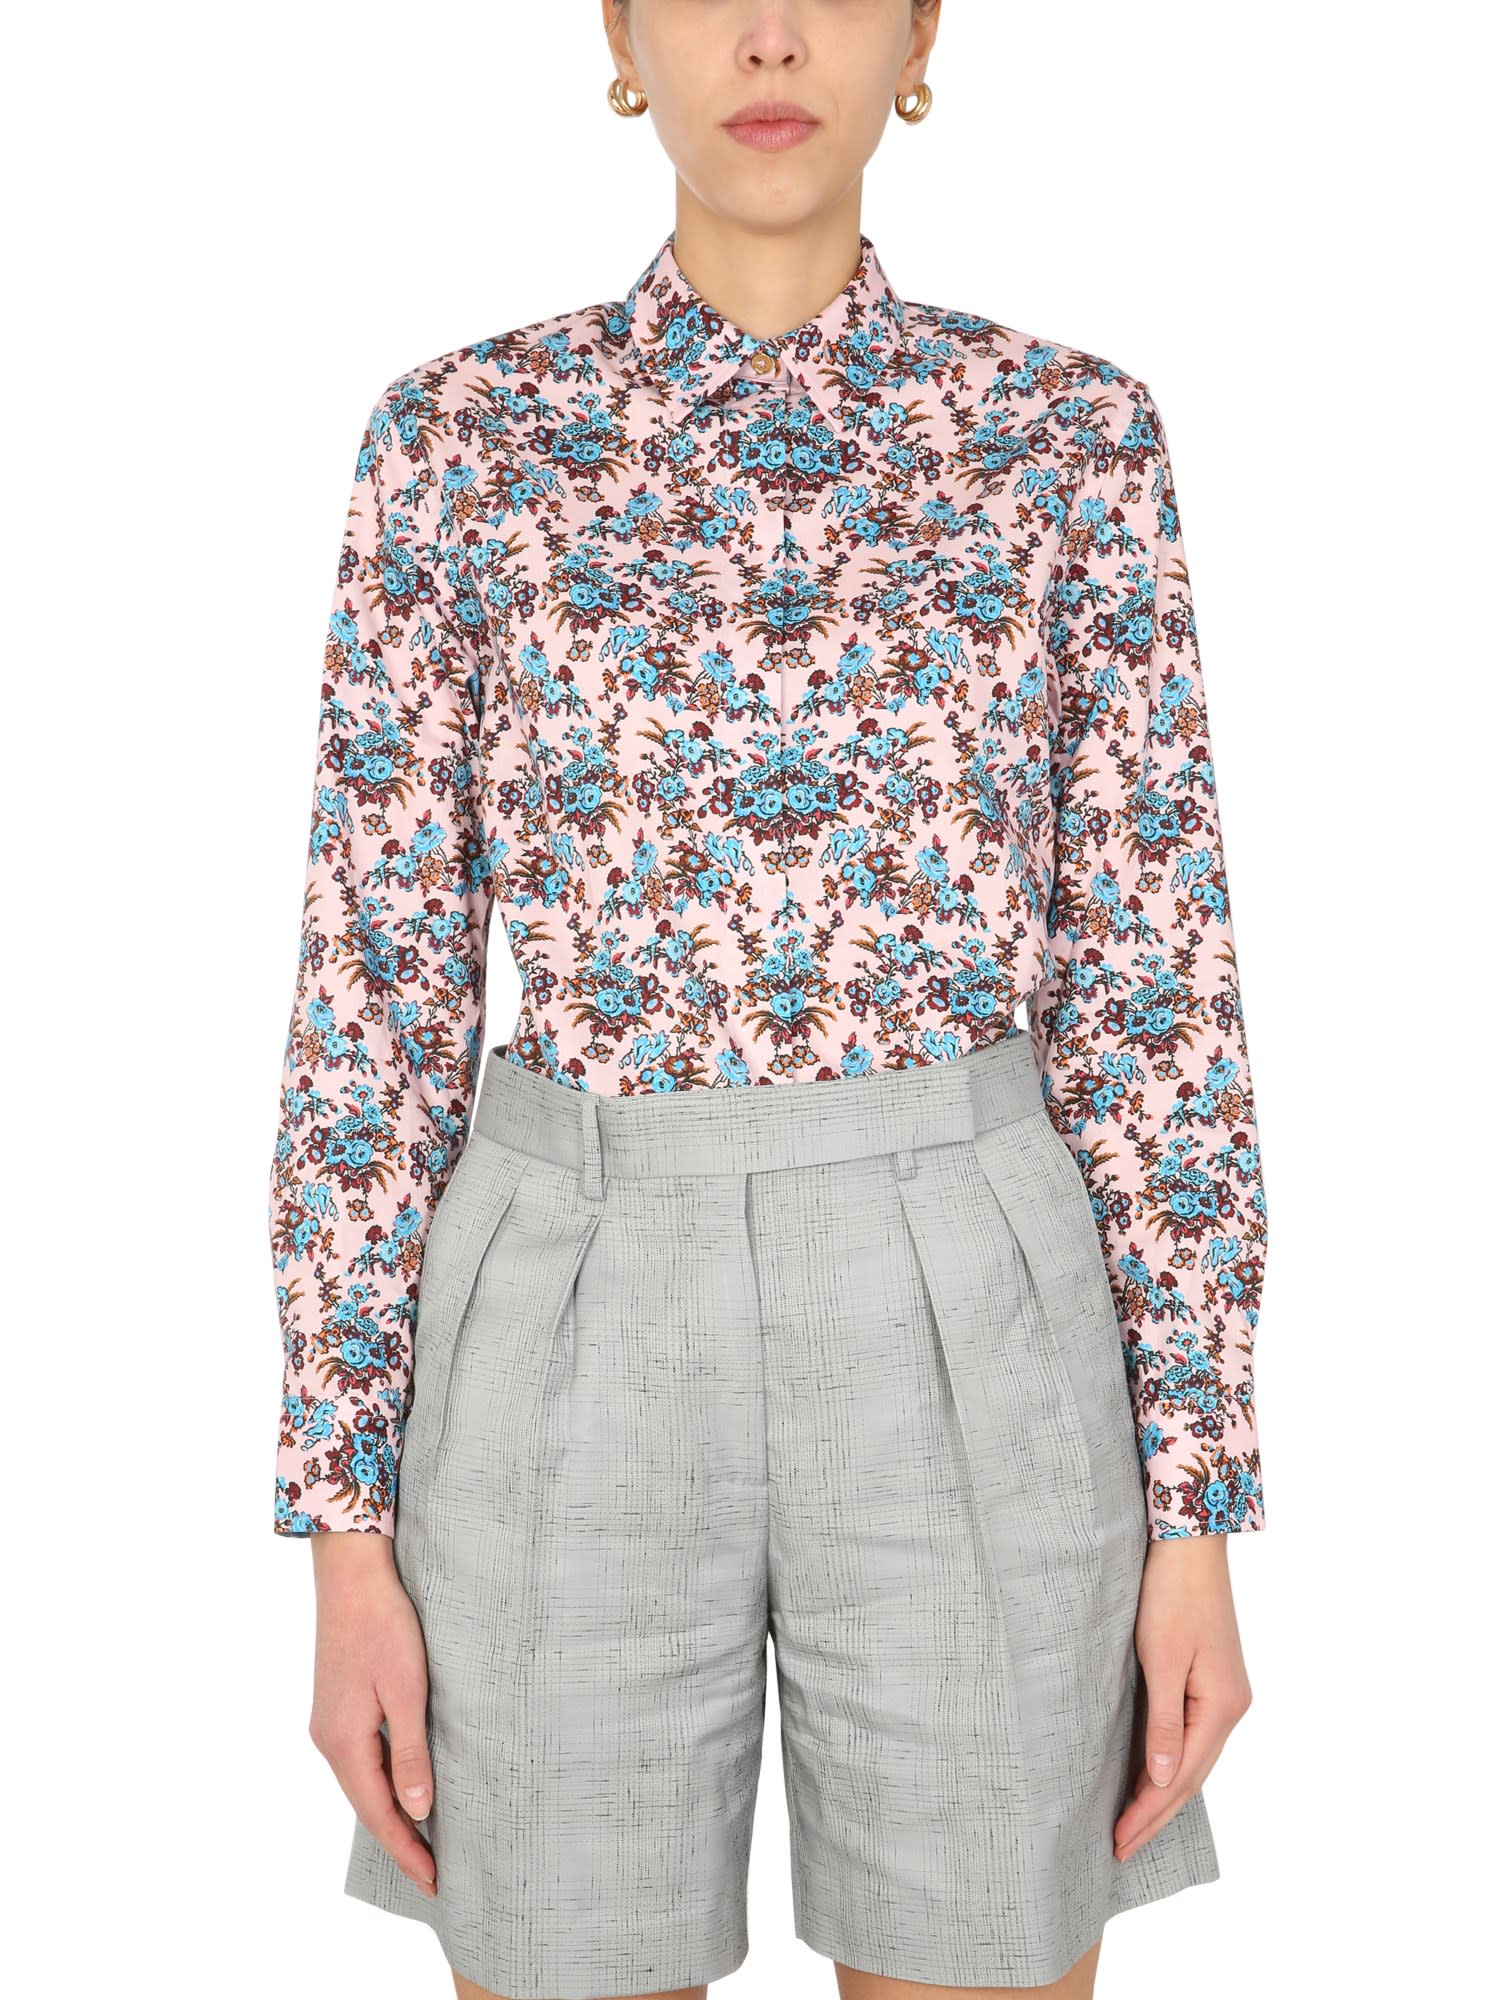 Paul Smith Shirt With mabel Floral Print